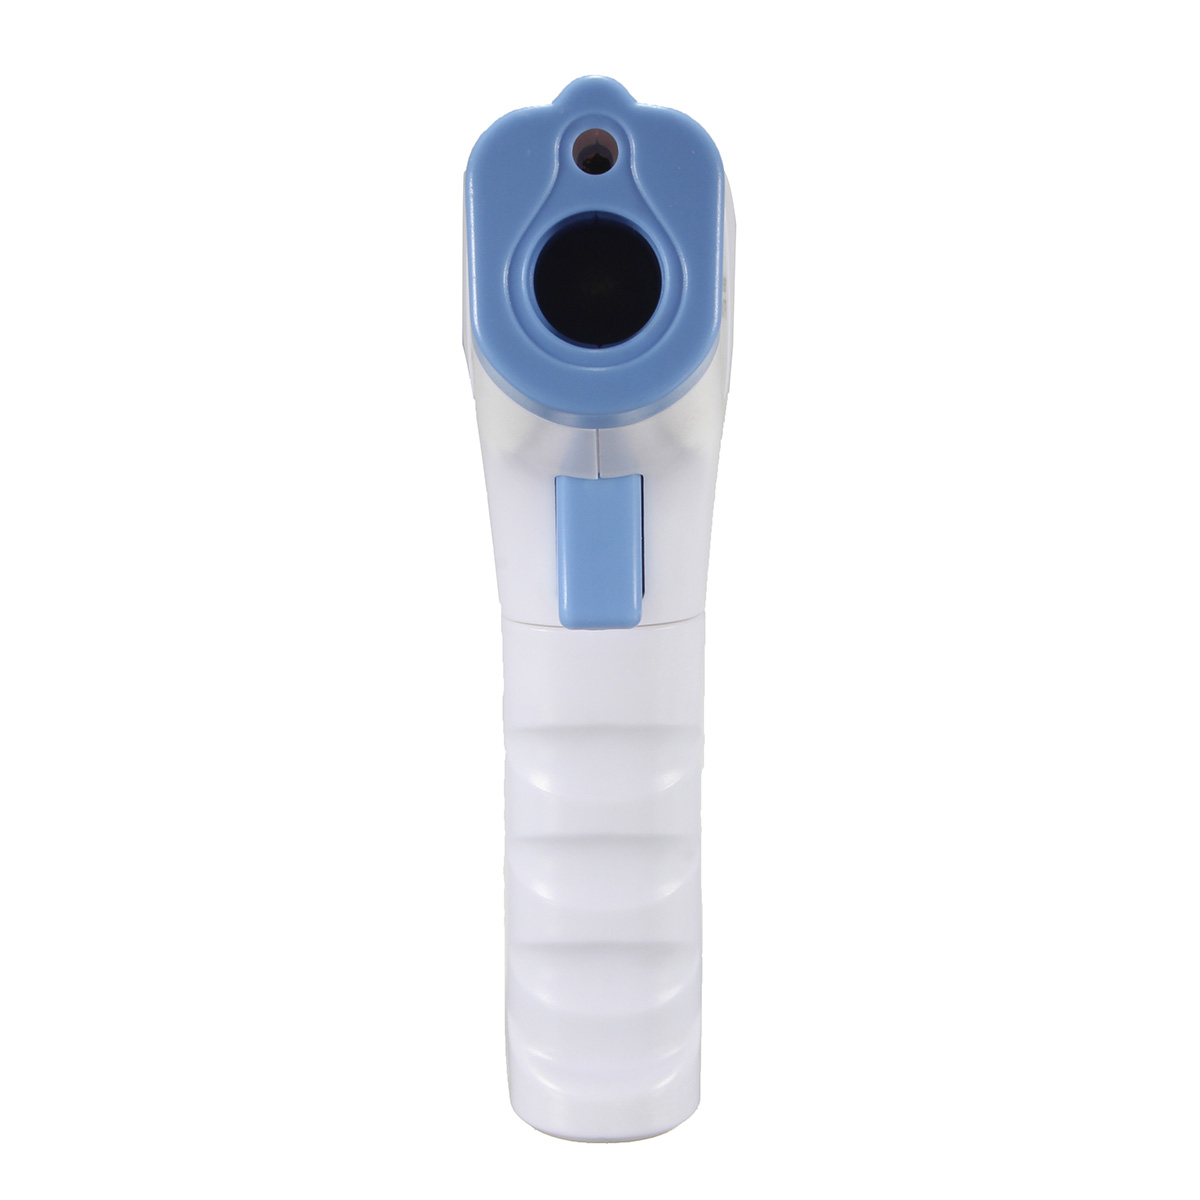 Digital-Non-Contact-No-Touch-Infrared-Forehead-Thermometer-DigitalThermometer-Measuring-Range-32-425-1132170-7